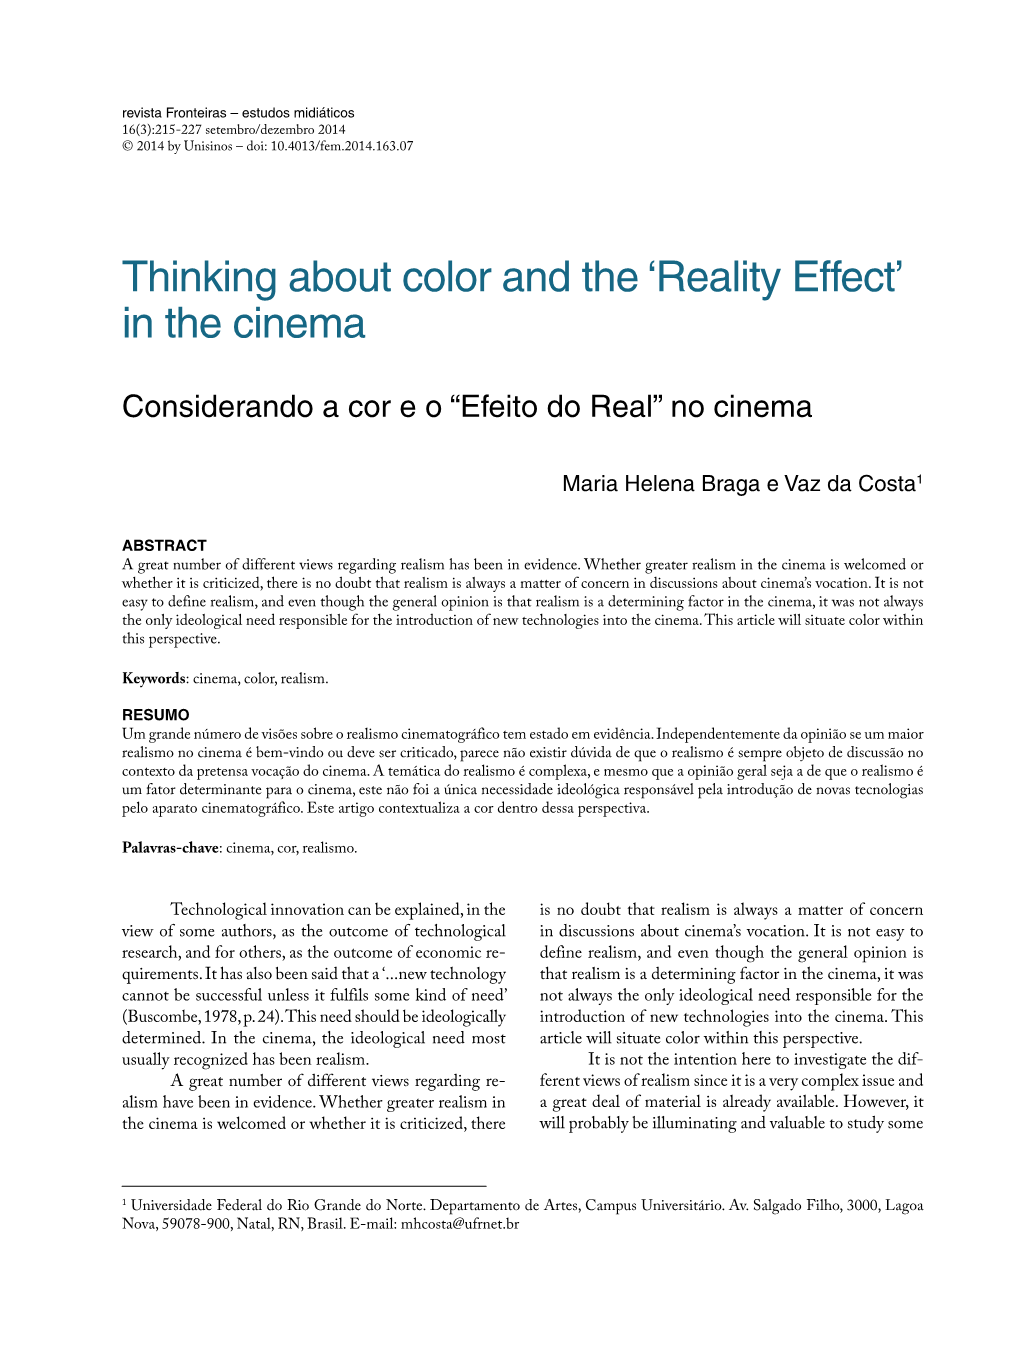 Thinking About Color and the 'Reality Effect' in the Cinema